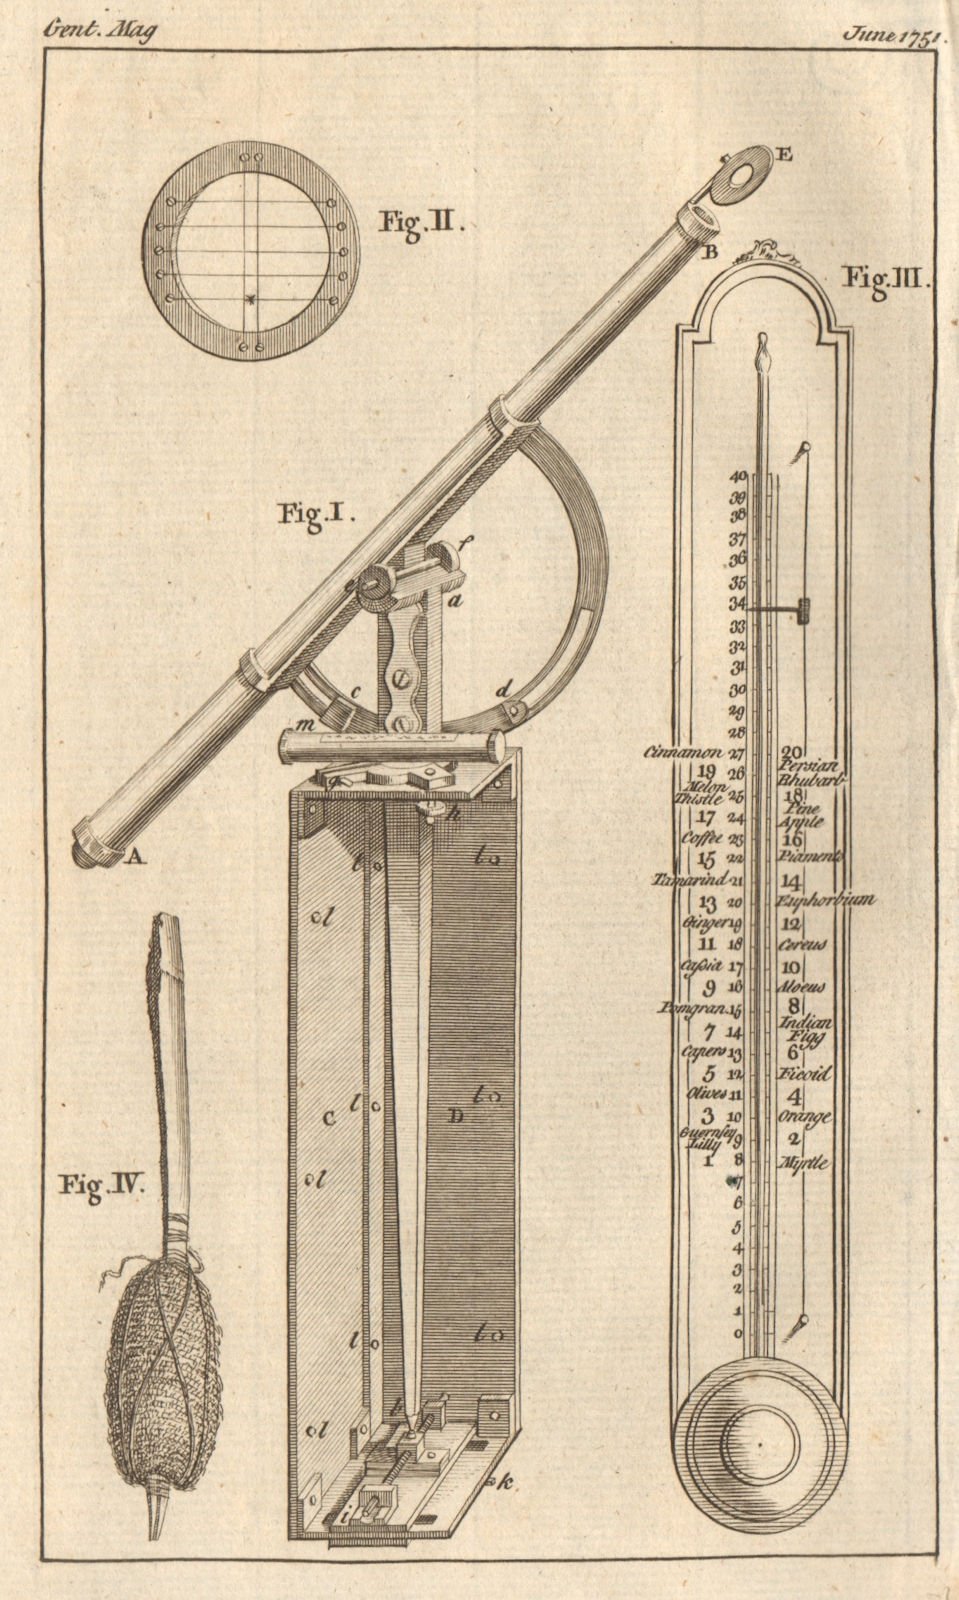 Timekeeper inspector. Botanic/greenhouse thermometer. Chinese pencil 1751